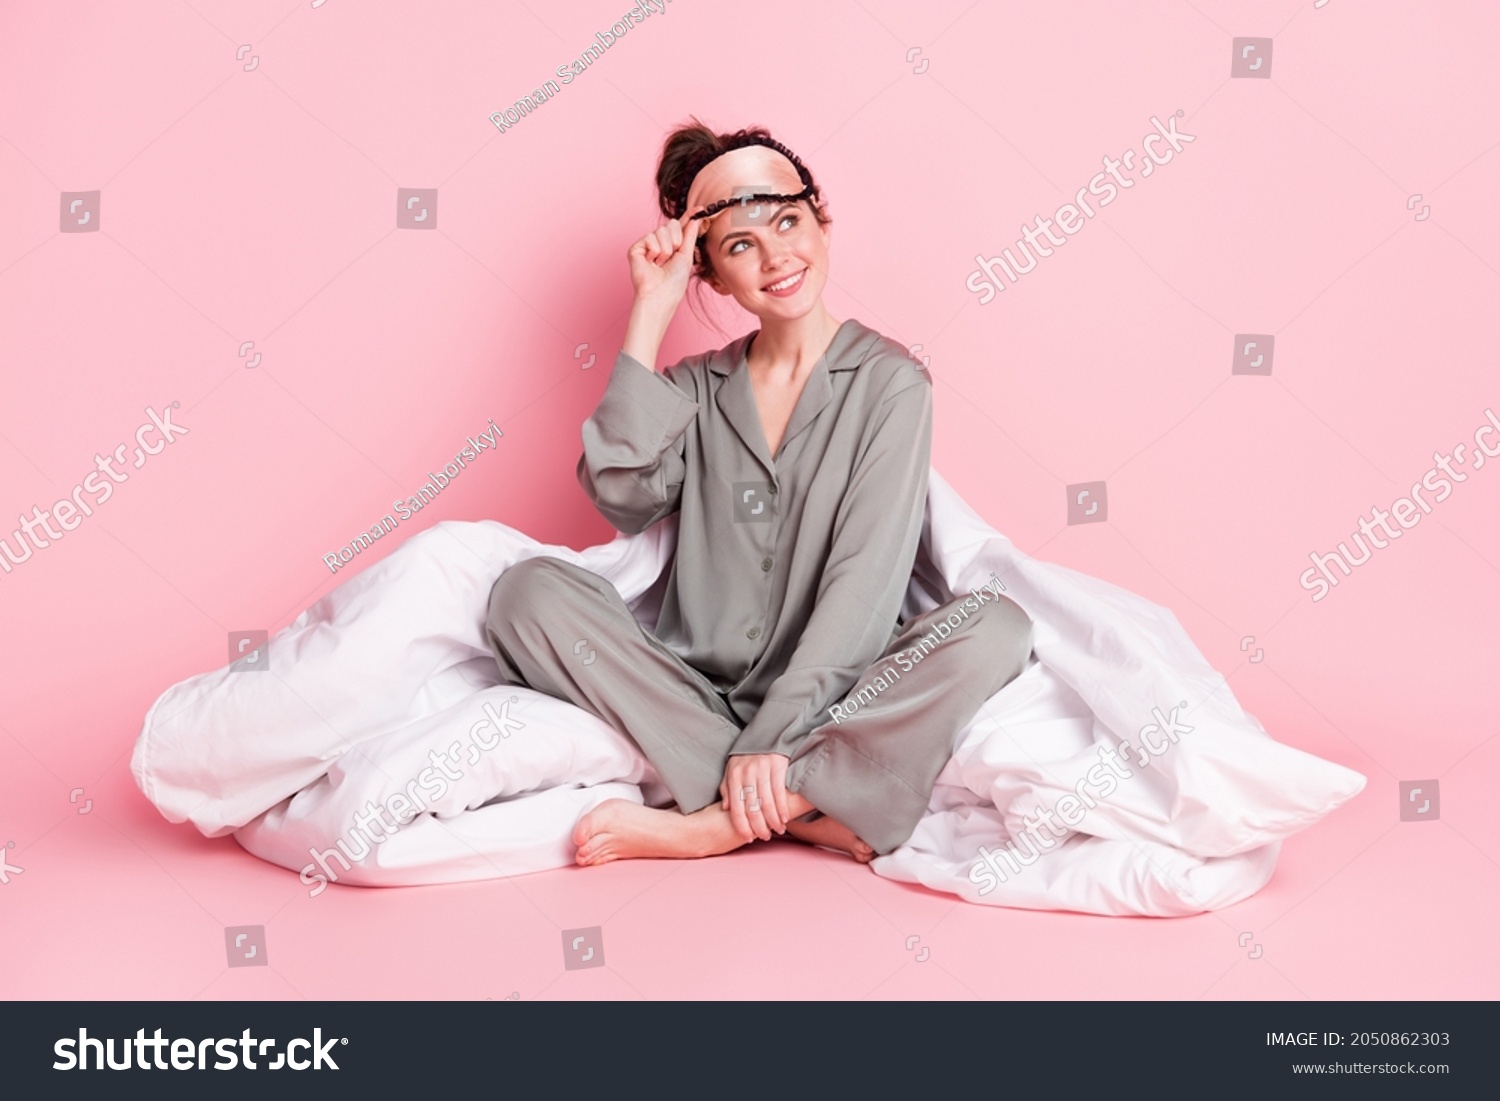 Portrait of attractive dreamy cheerful girl in pajama sitting on bed linen isolated over pink pastel color background #2050862303